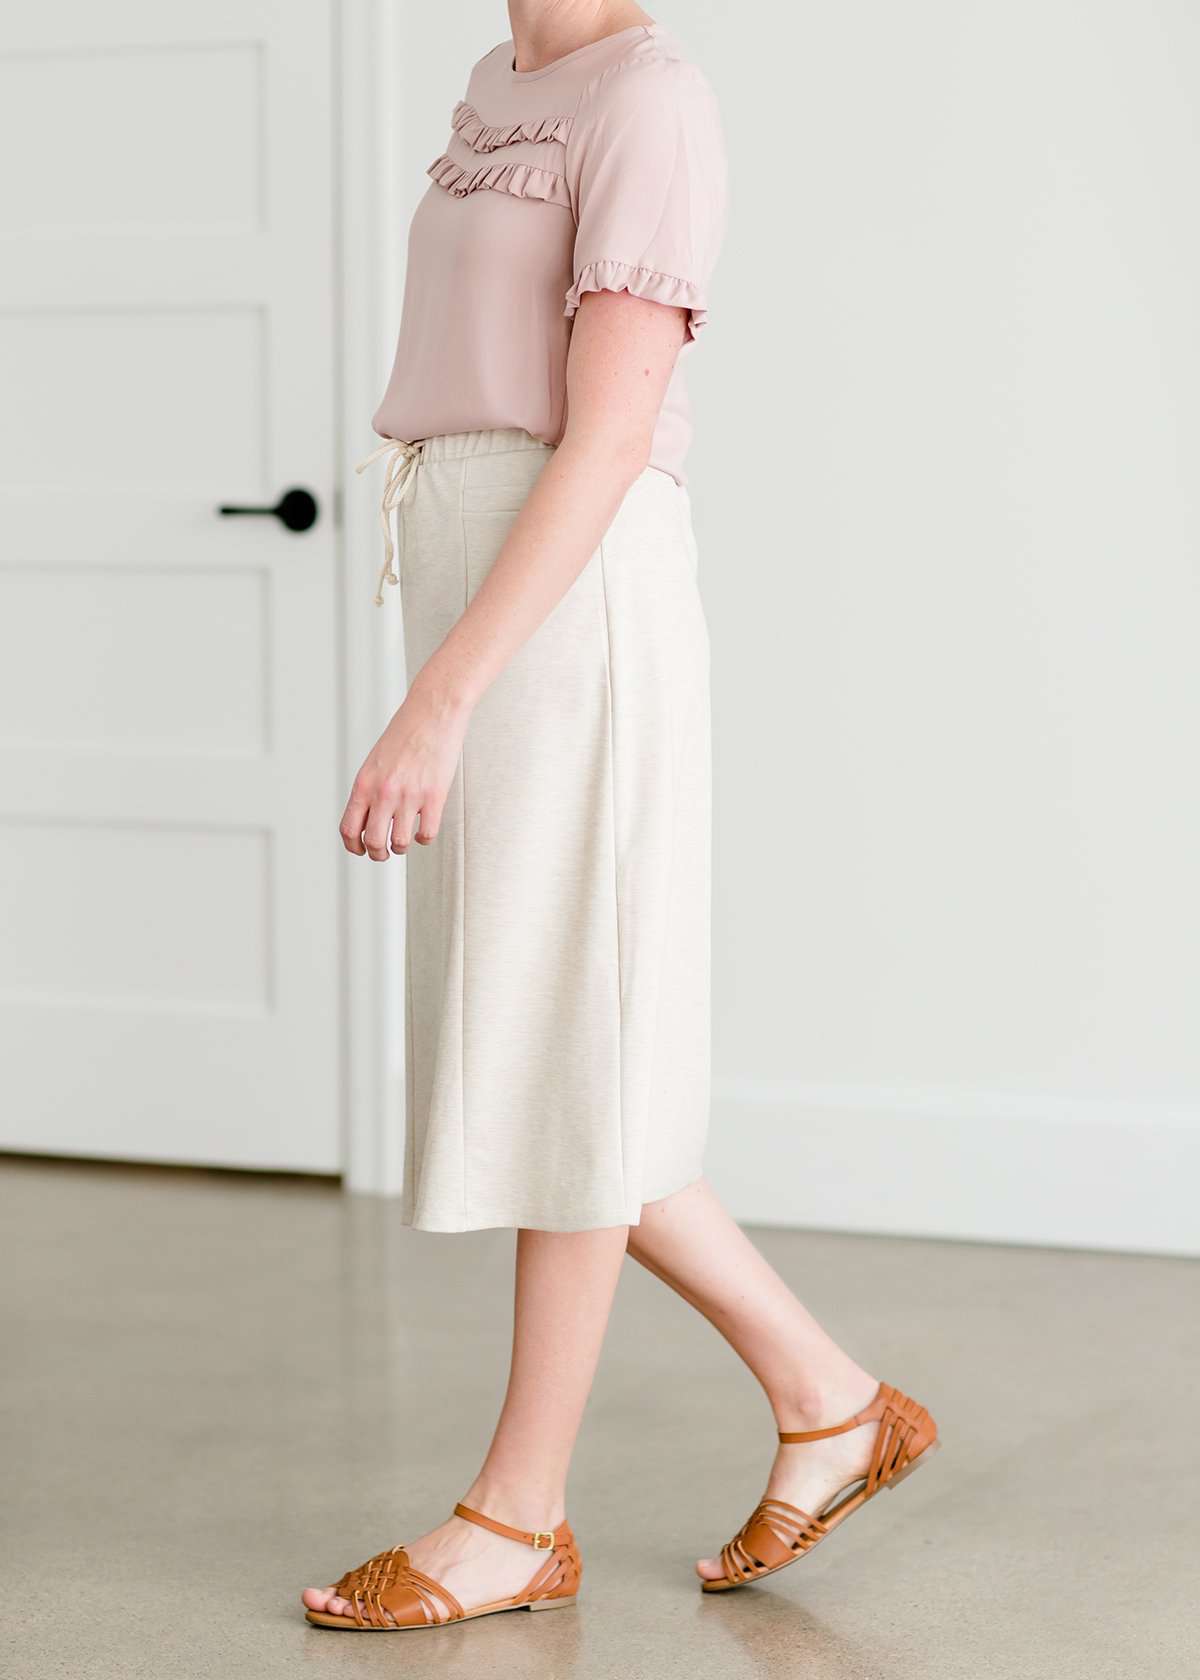 Woman wearing a cream colored french terry below the knee skirt with front ties, front panels and pockets!